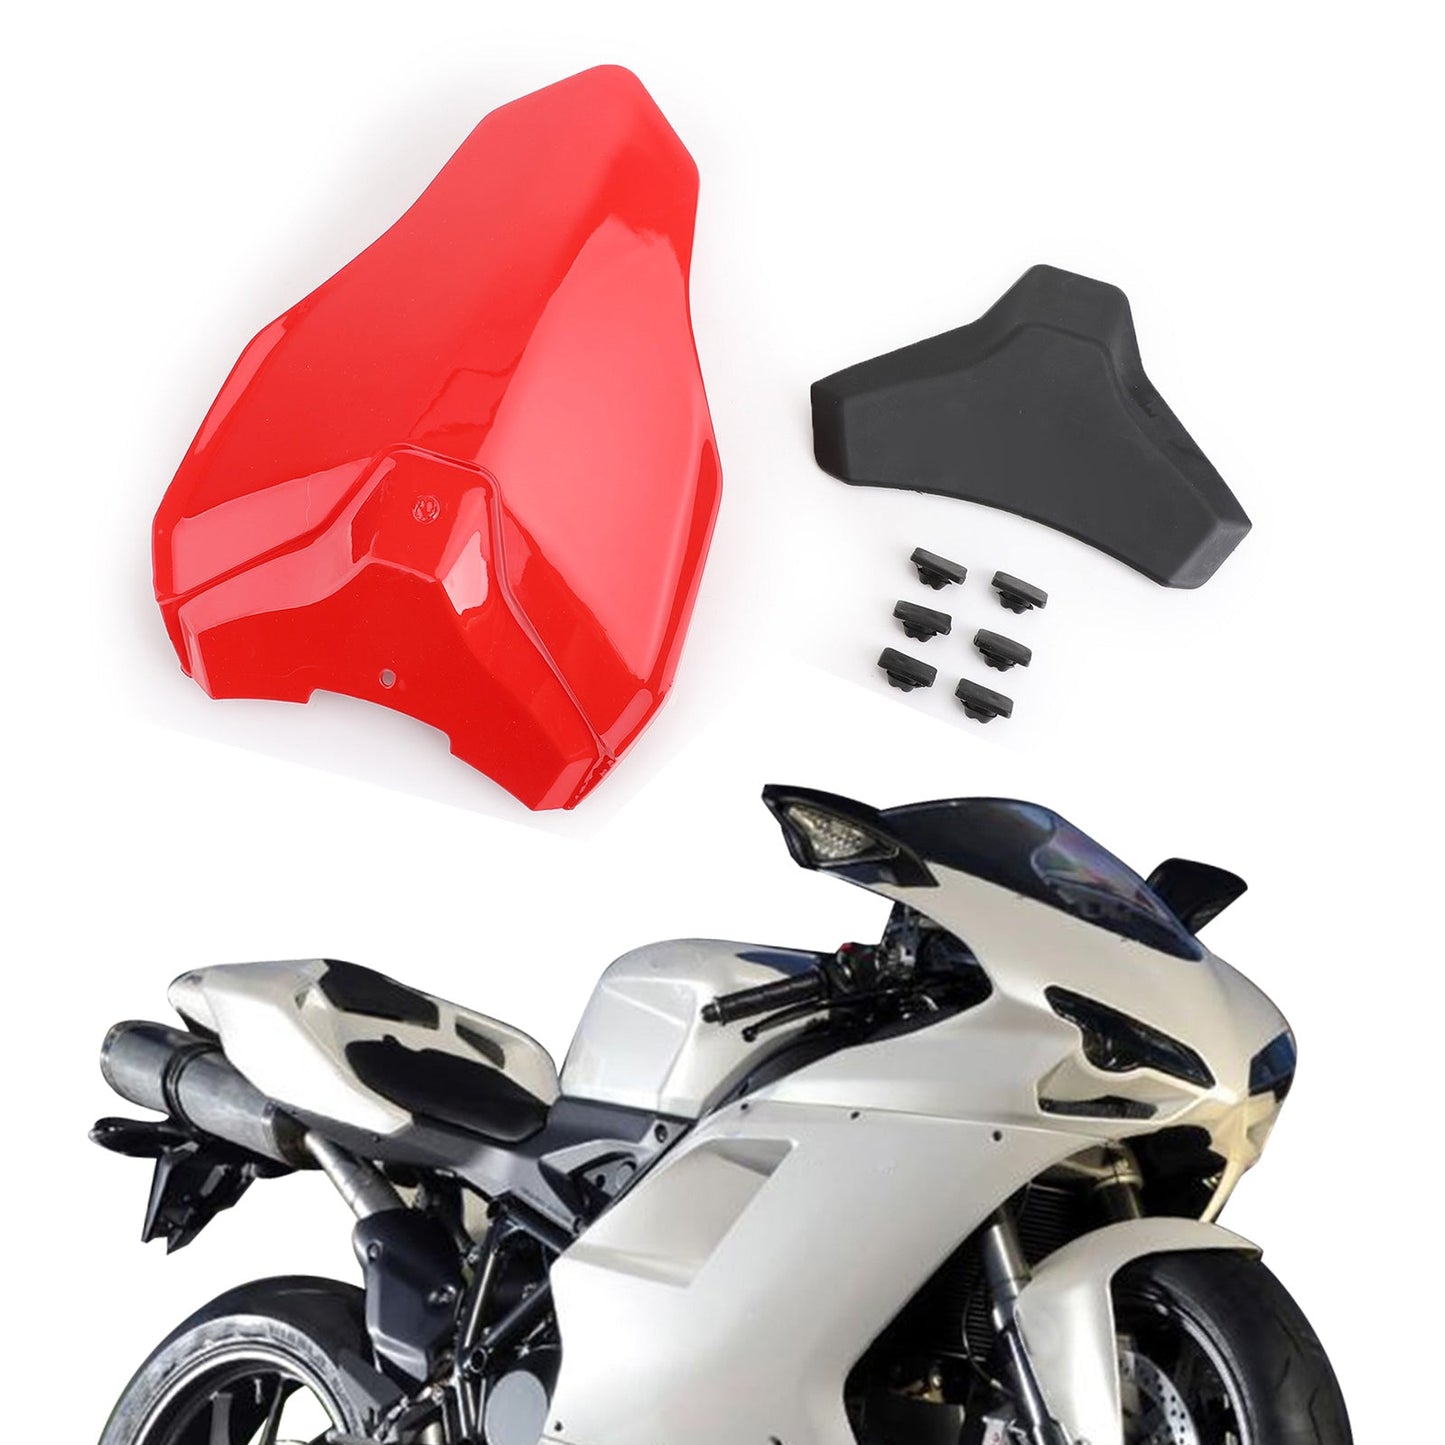 Motorcycle ABS Rear Seat Fairing Cover Cowl For DUCATI 848/1098/1198 07-09 Black